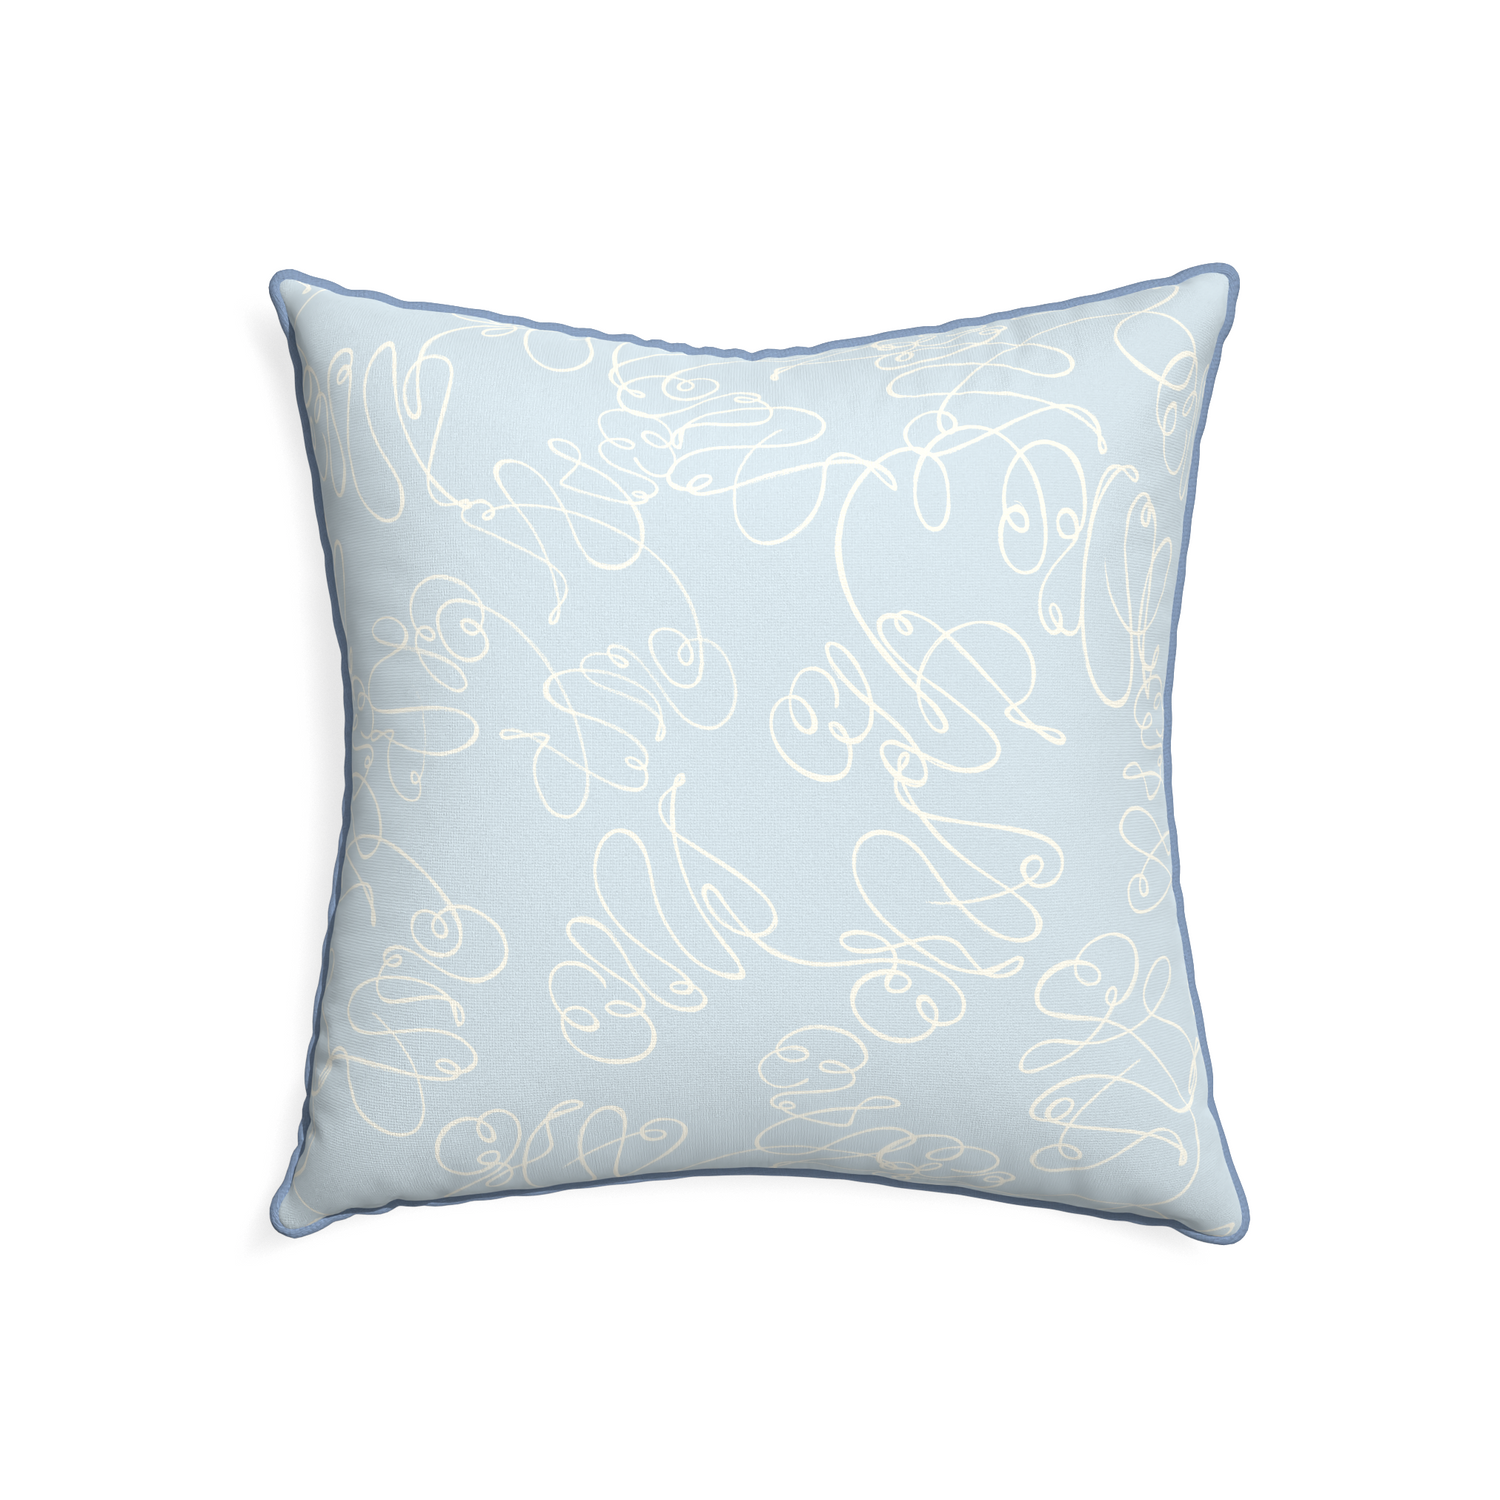 22-square mirabella custom pillow with sky piping on white background